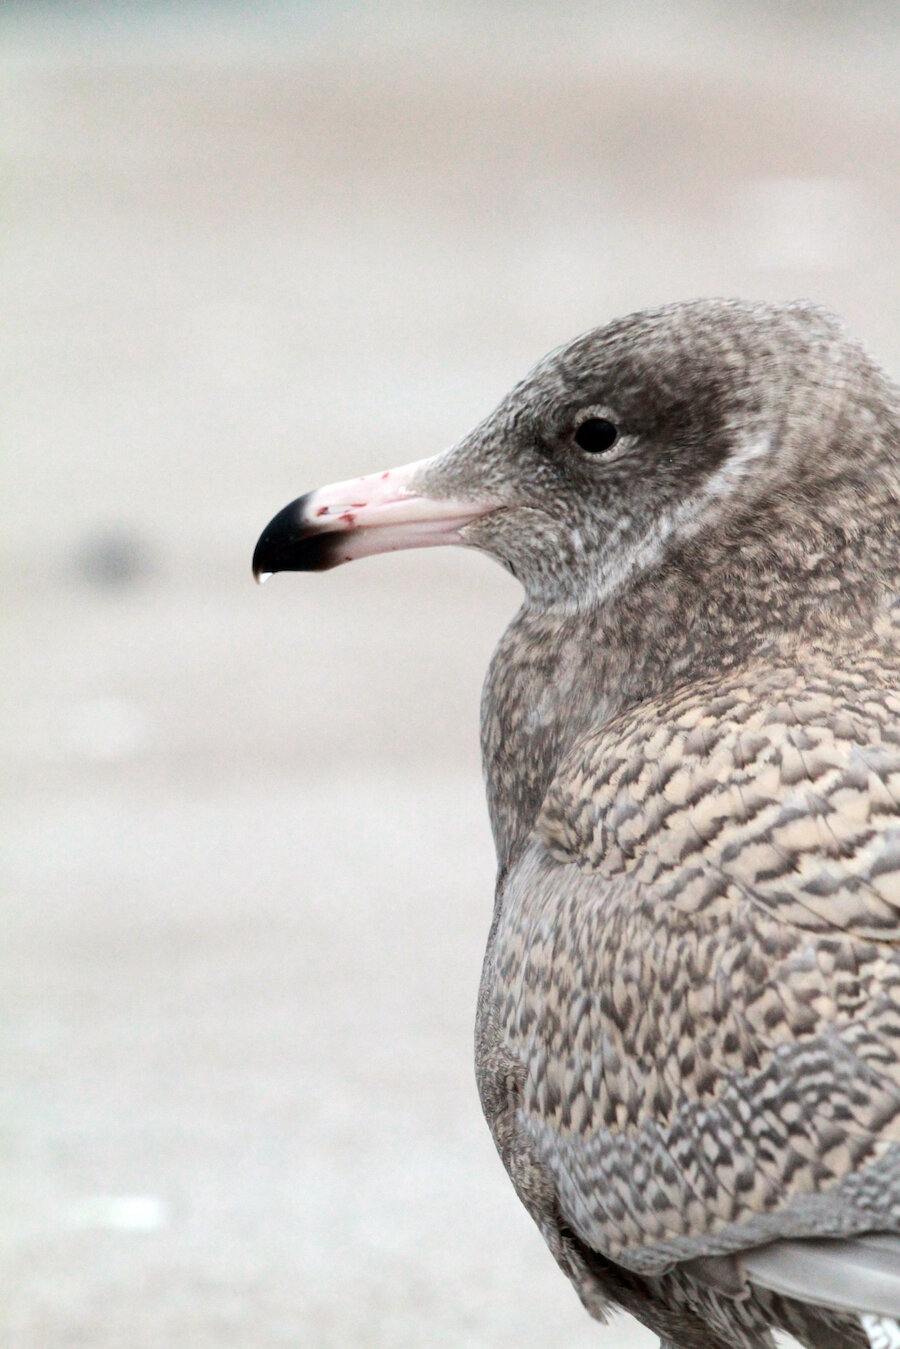 A sighting of a Glaucous Gull could signal that an Arctic blast is on its way | Jon Dunn